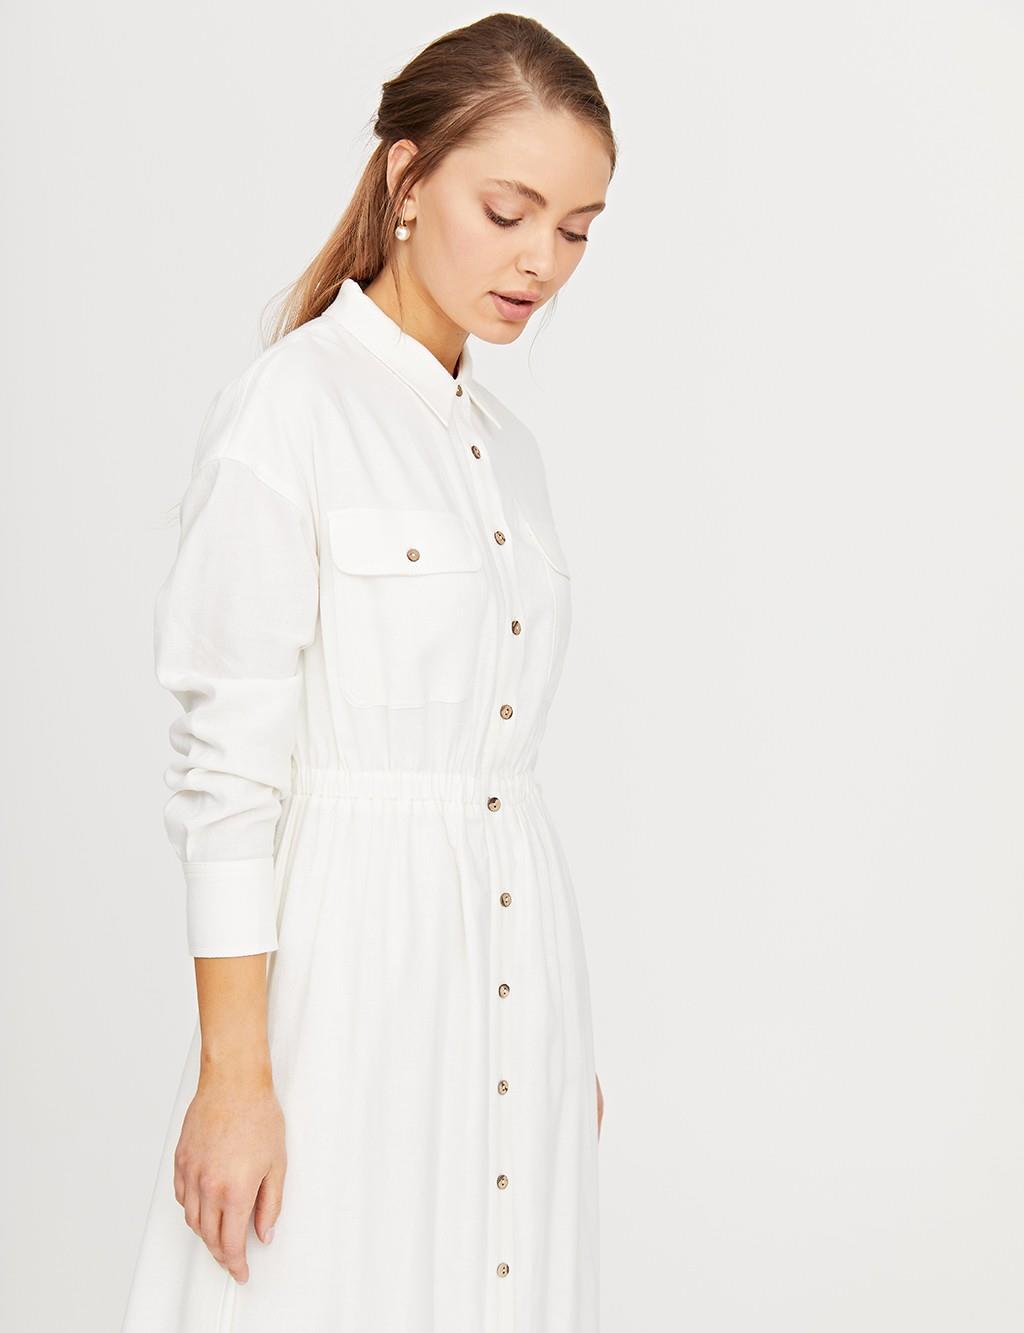 Buttoned Dress with Double Pocket B21 23156 Ecru